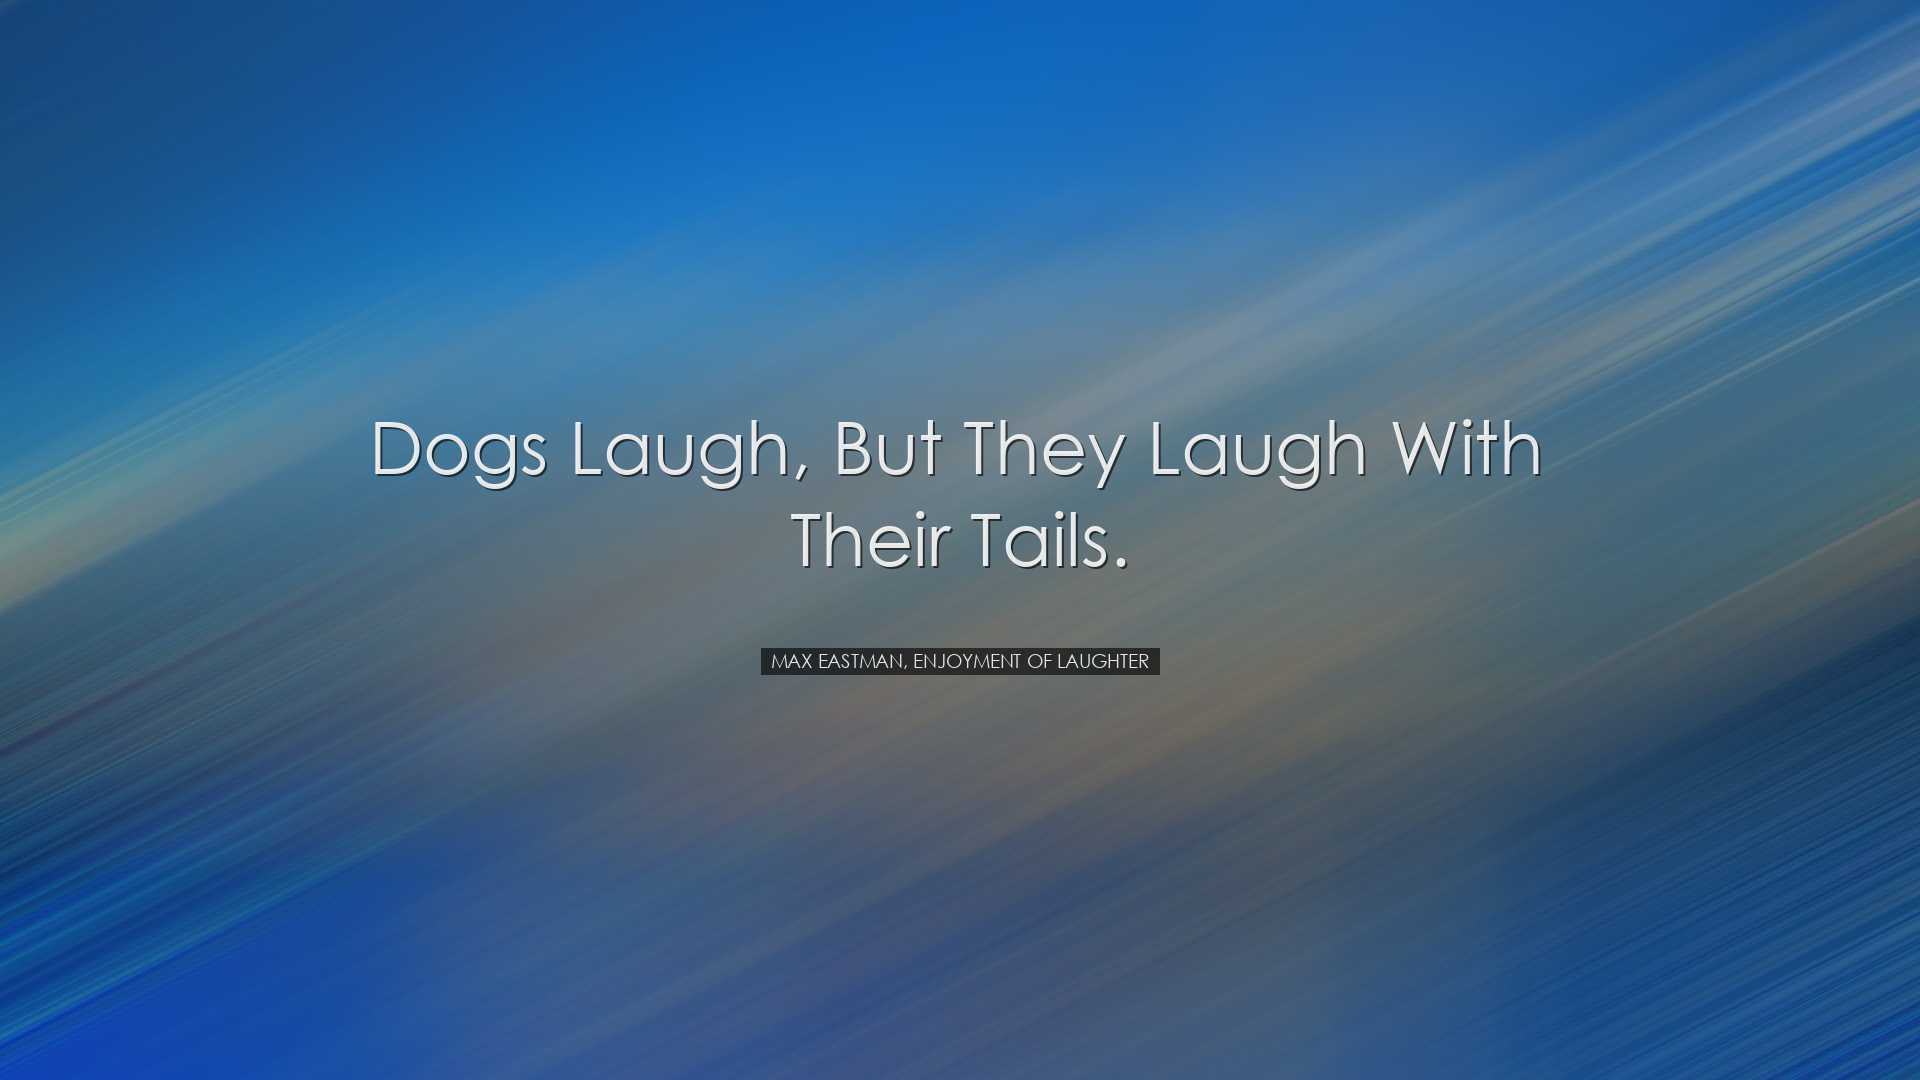 Dogs laugh, but they laugh with their tails. - Max Eastman, Enjoym